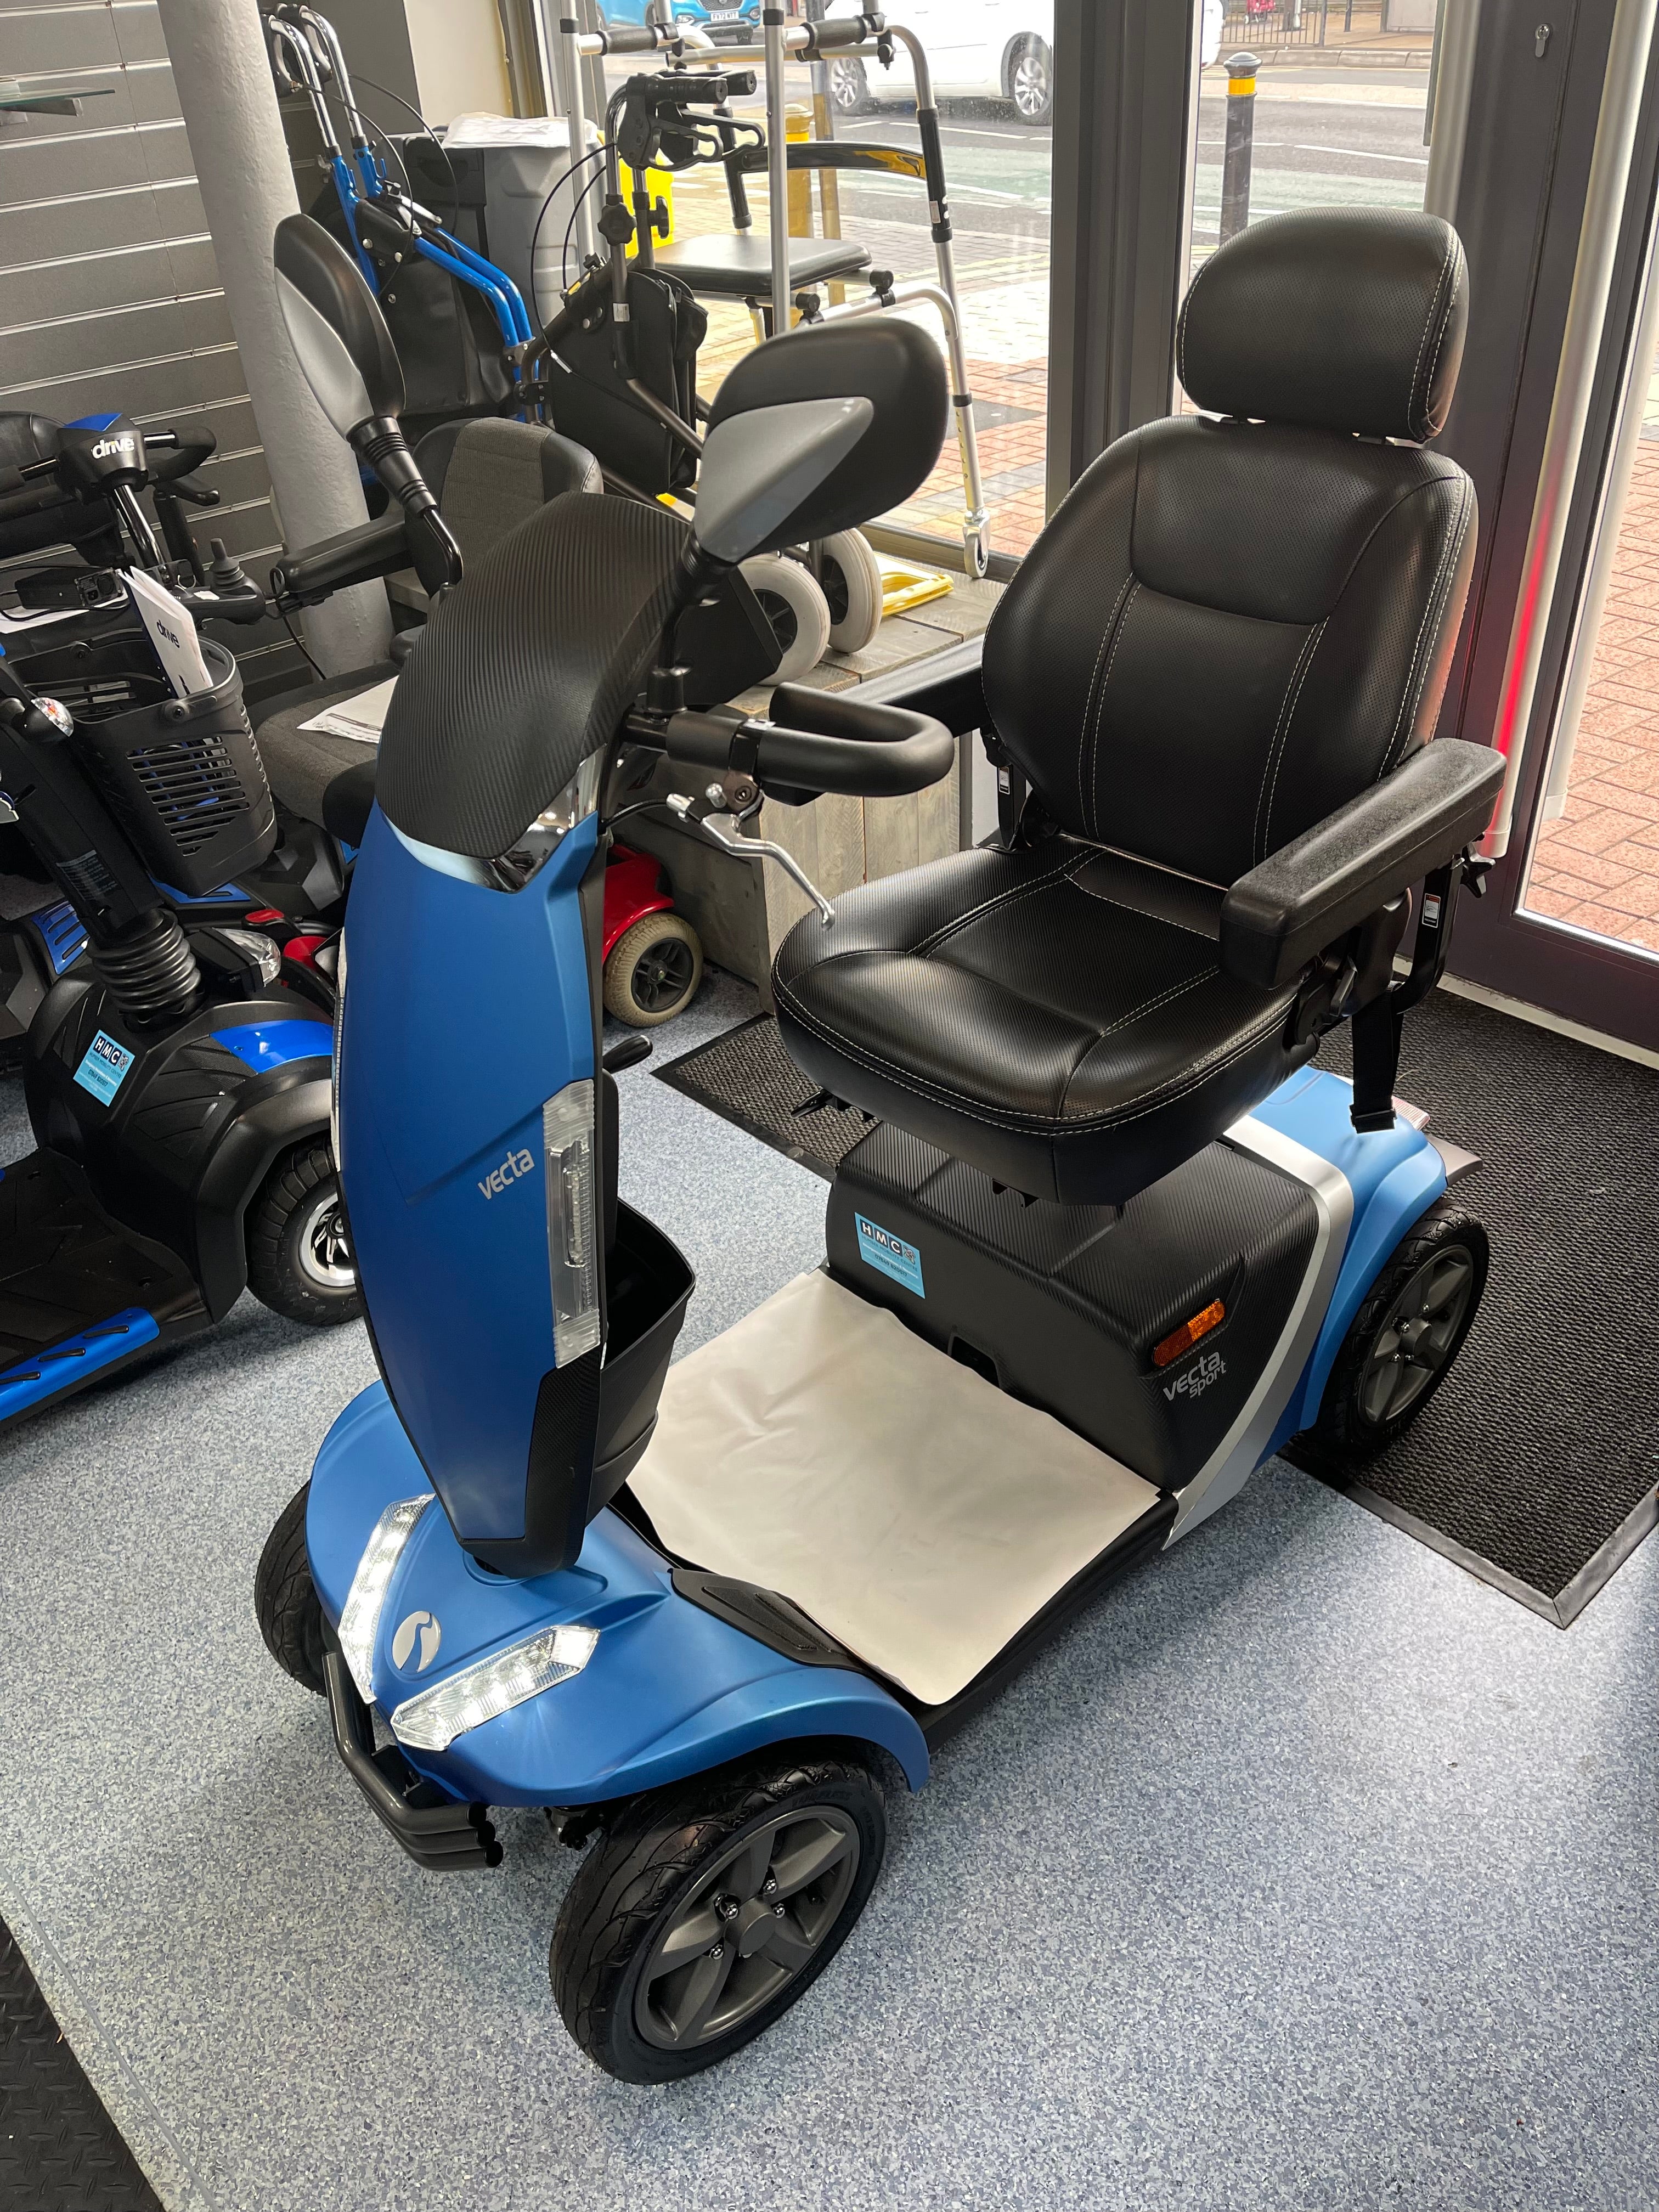 RASCAL VECTA SPORT MOBILITY SCOOTER